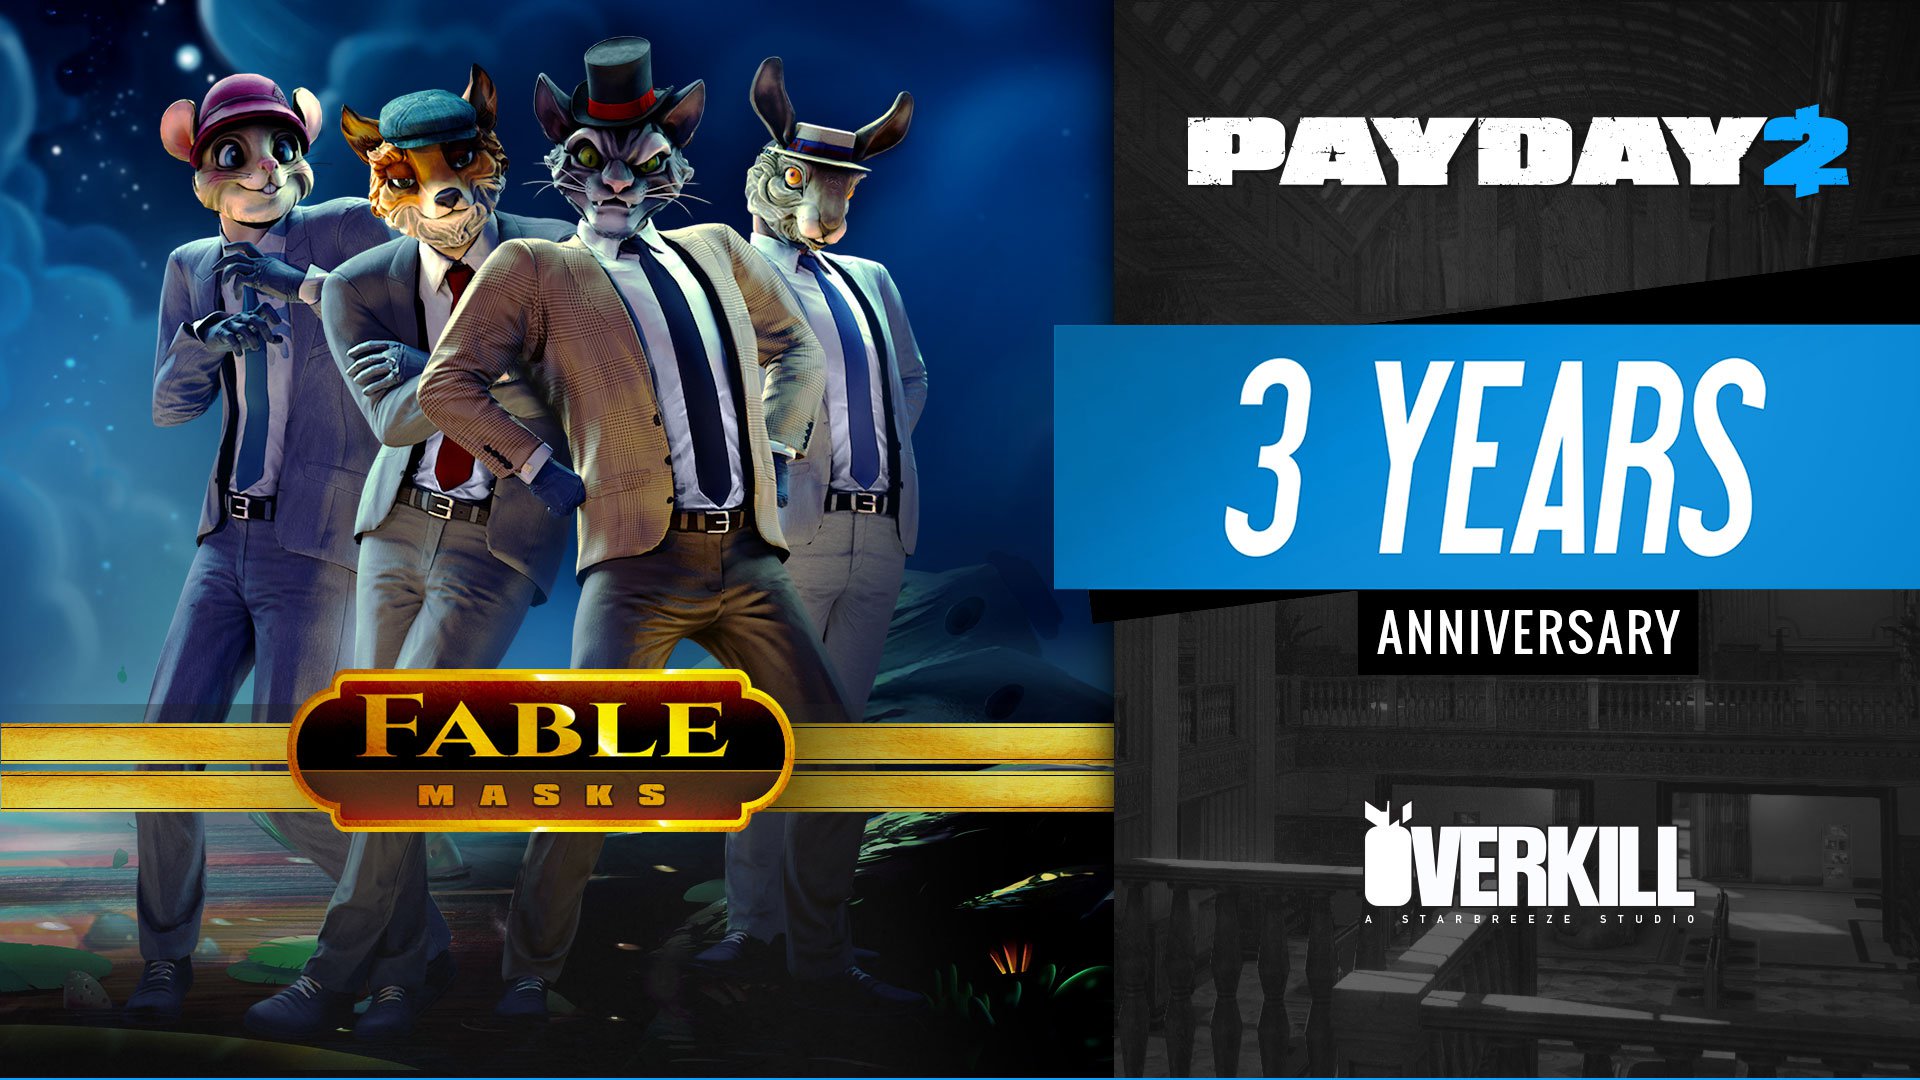 PAYDAY 2: Update 106 is live and PAYDAY 2 just turned 3 years old! - OVERKILL Software1920 x 1080